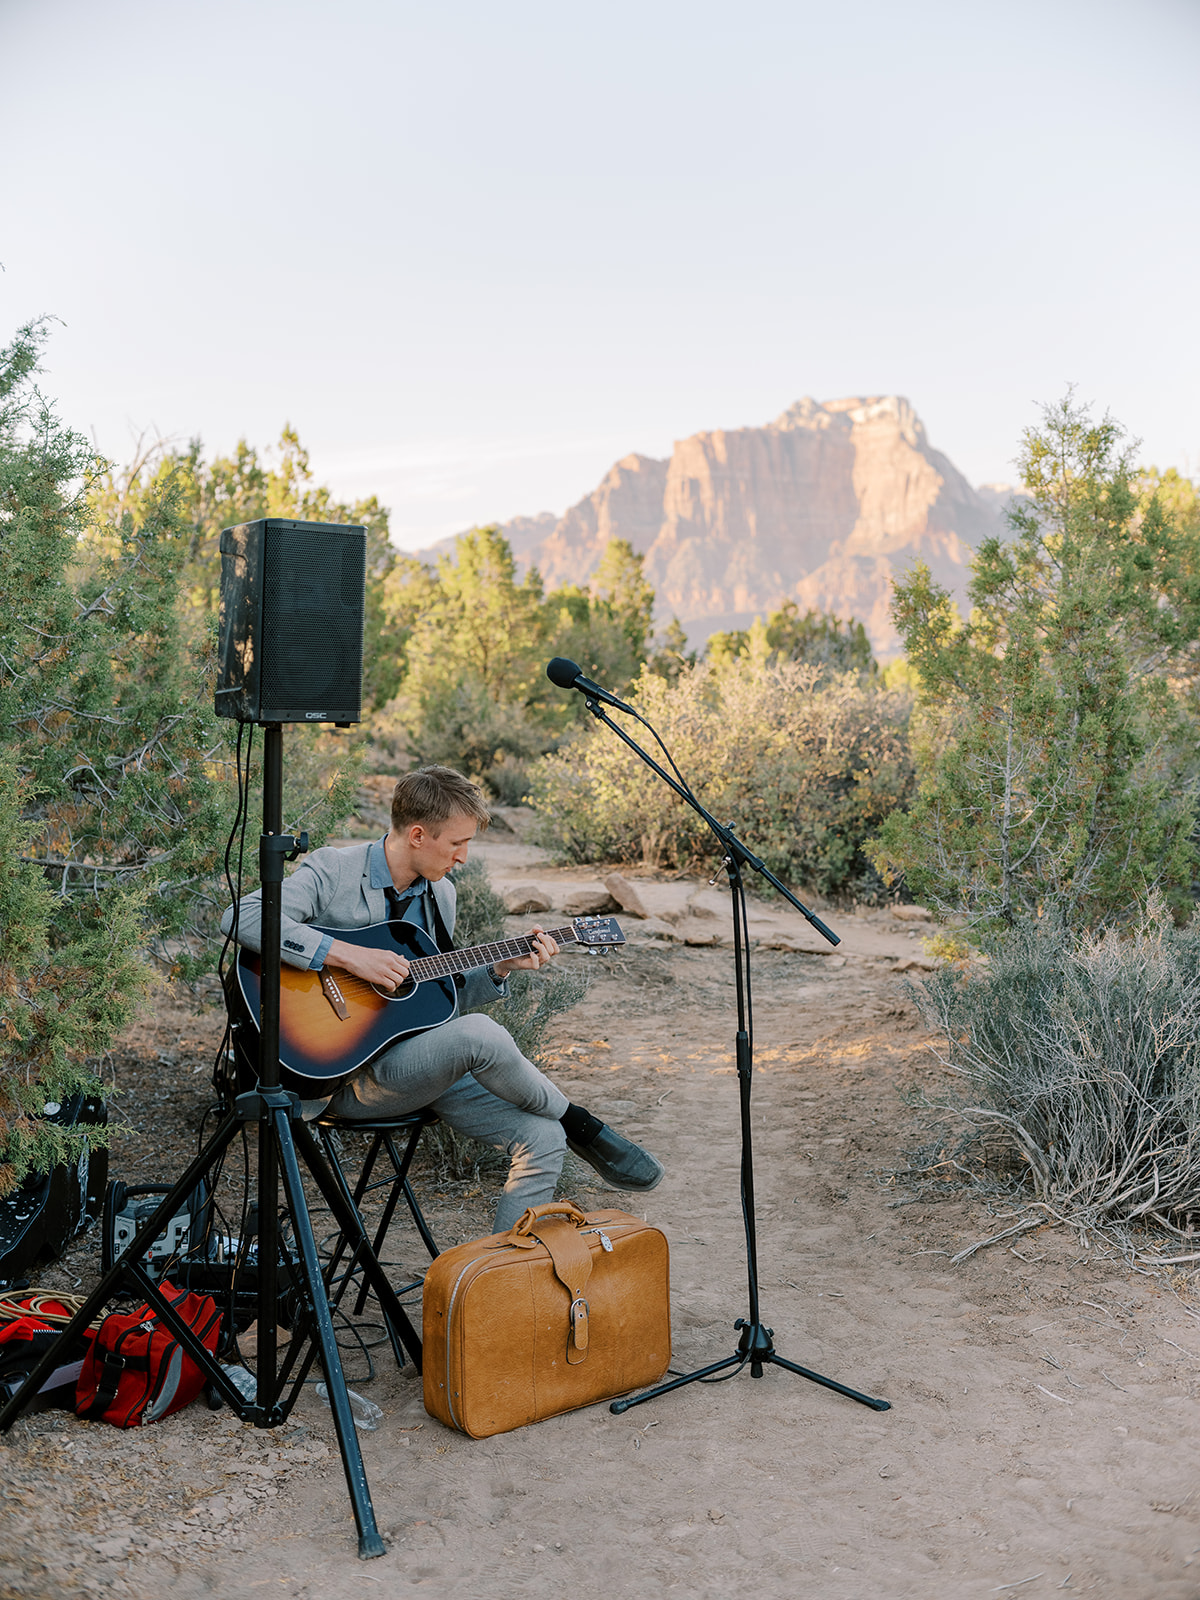 Private musician plays for the wedding guests after the wedding on BLM land outside of Zion National Park